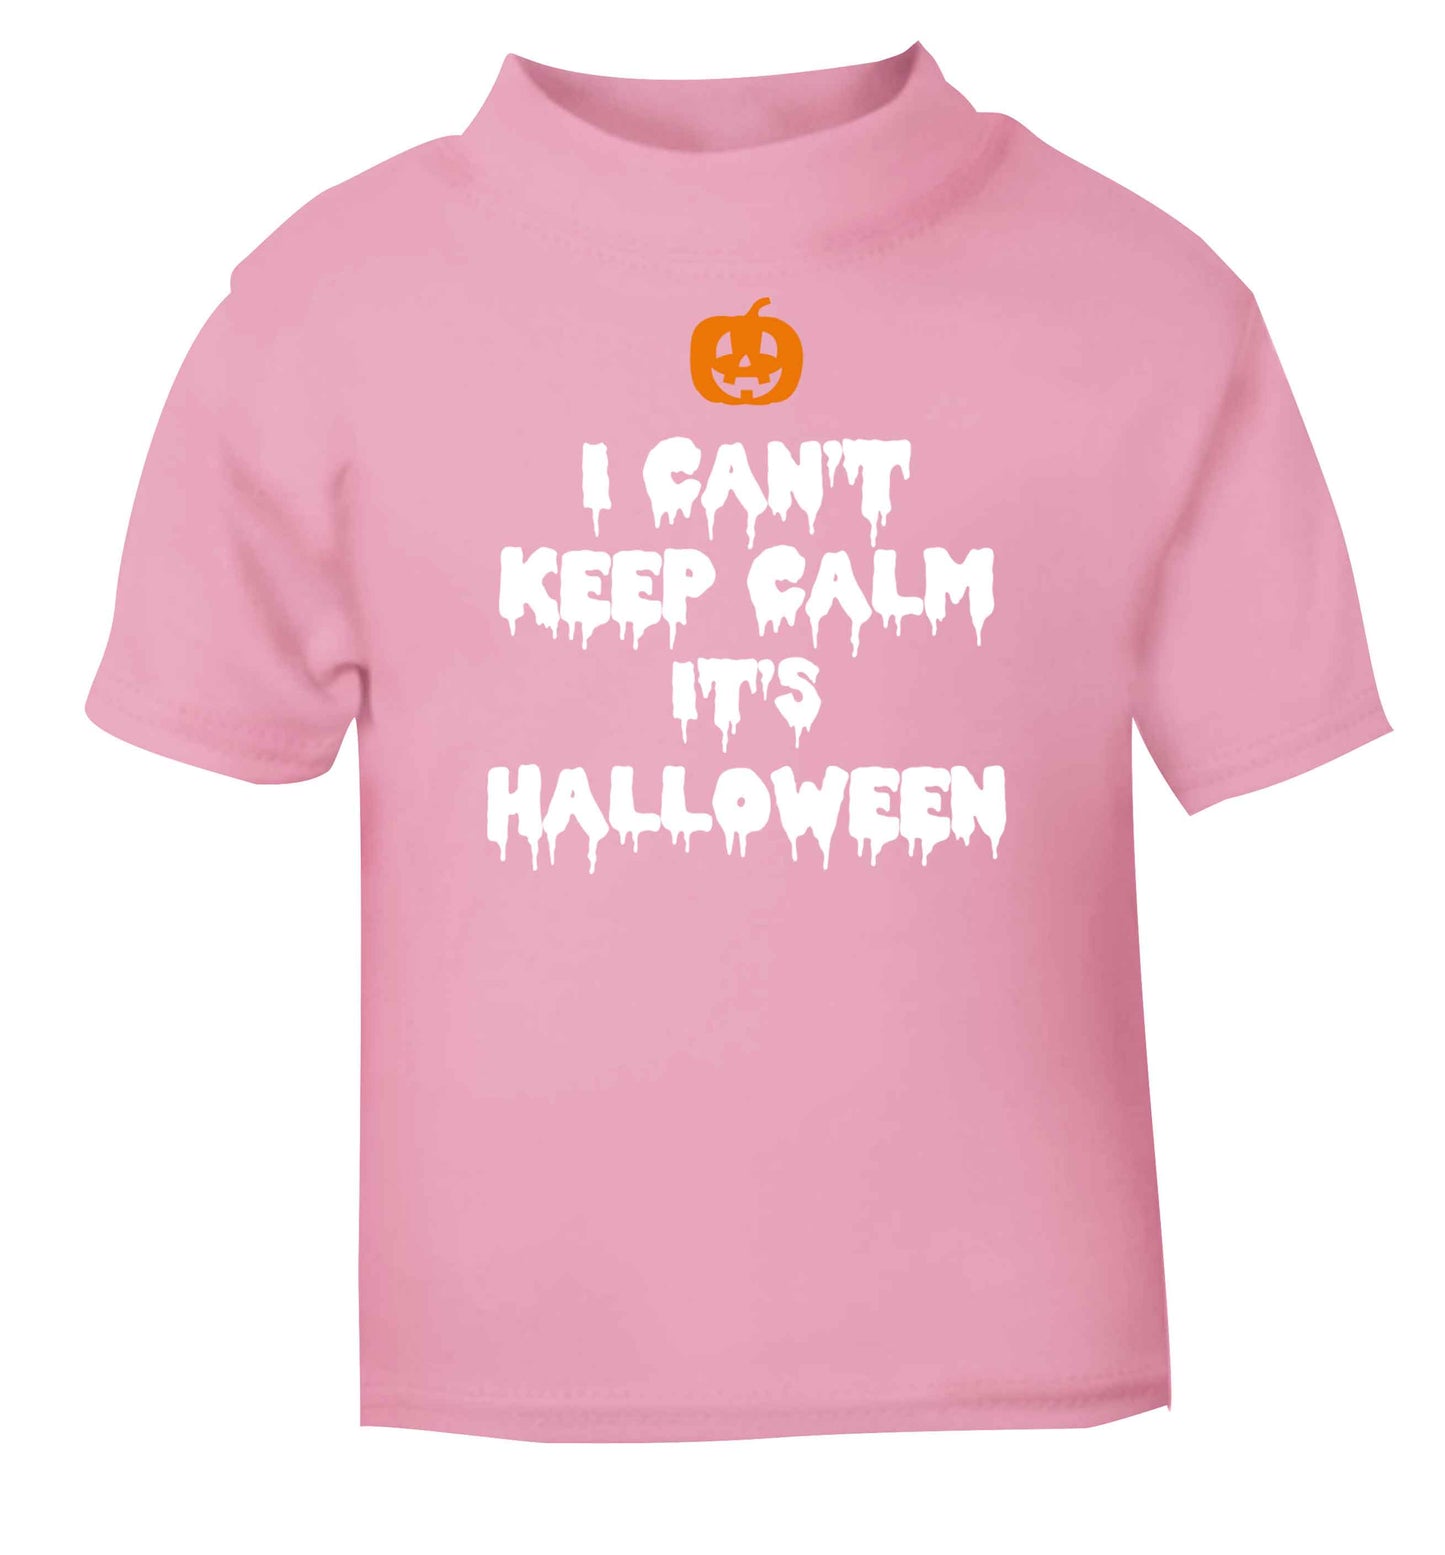 I can't keep calm it's halloween light pink baby toddler Tshirt 2 Years